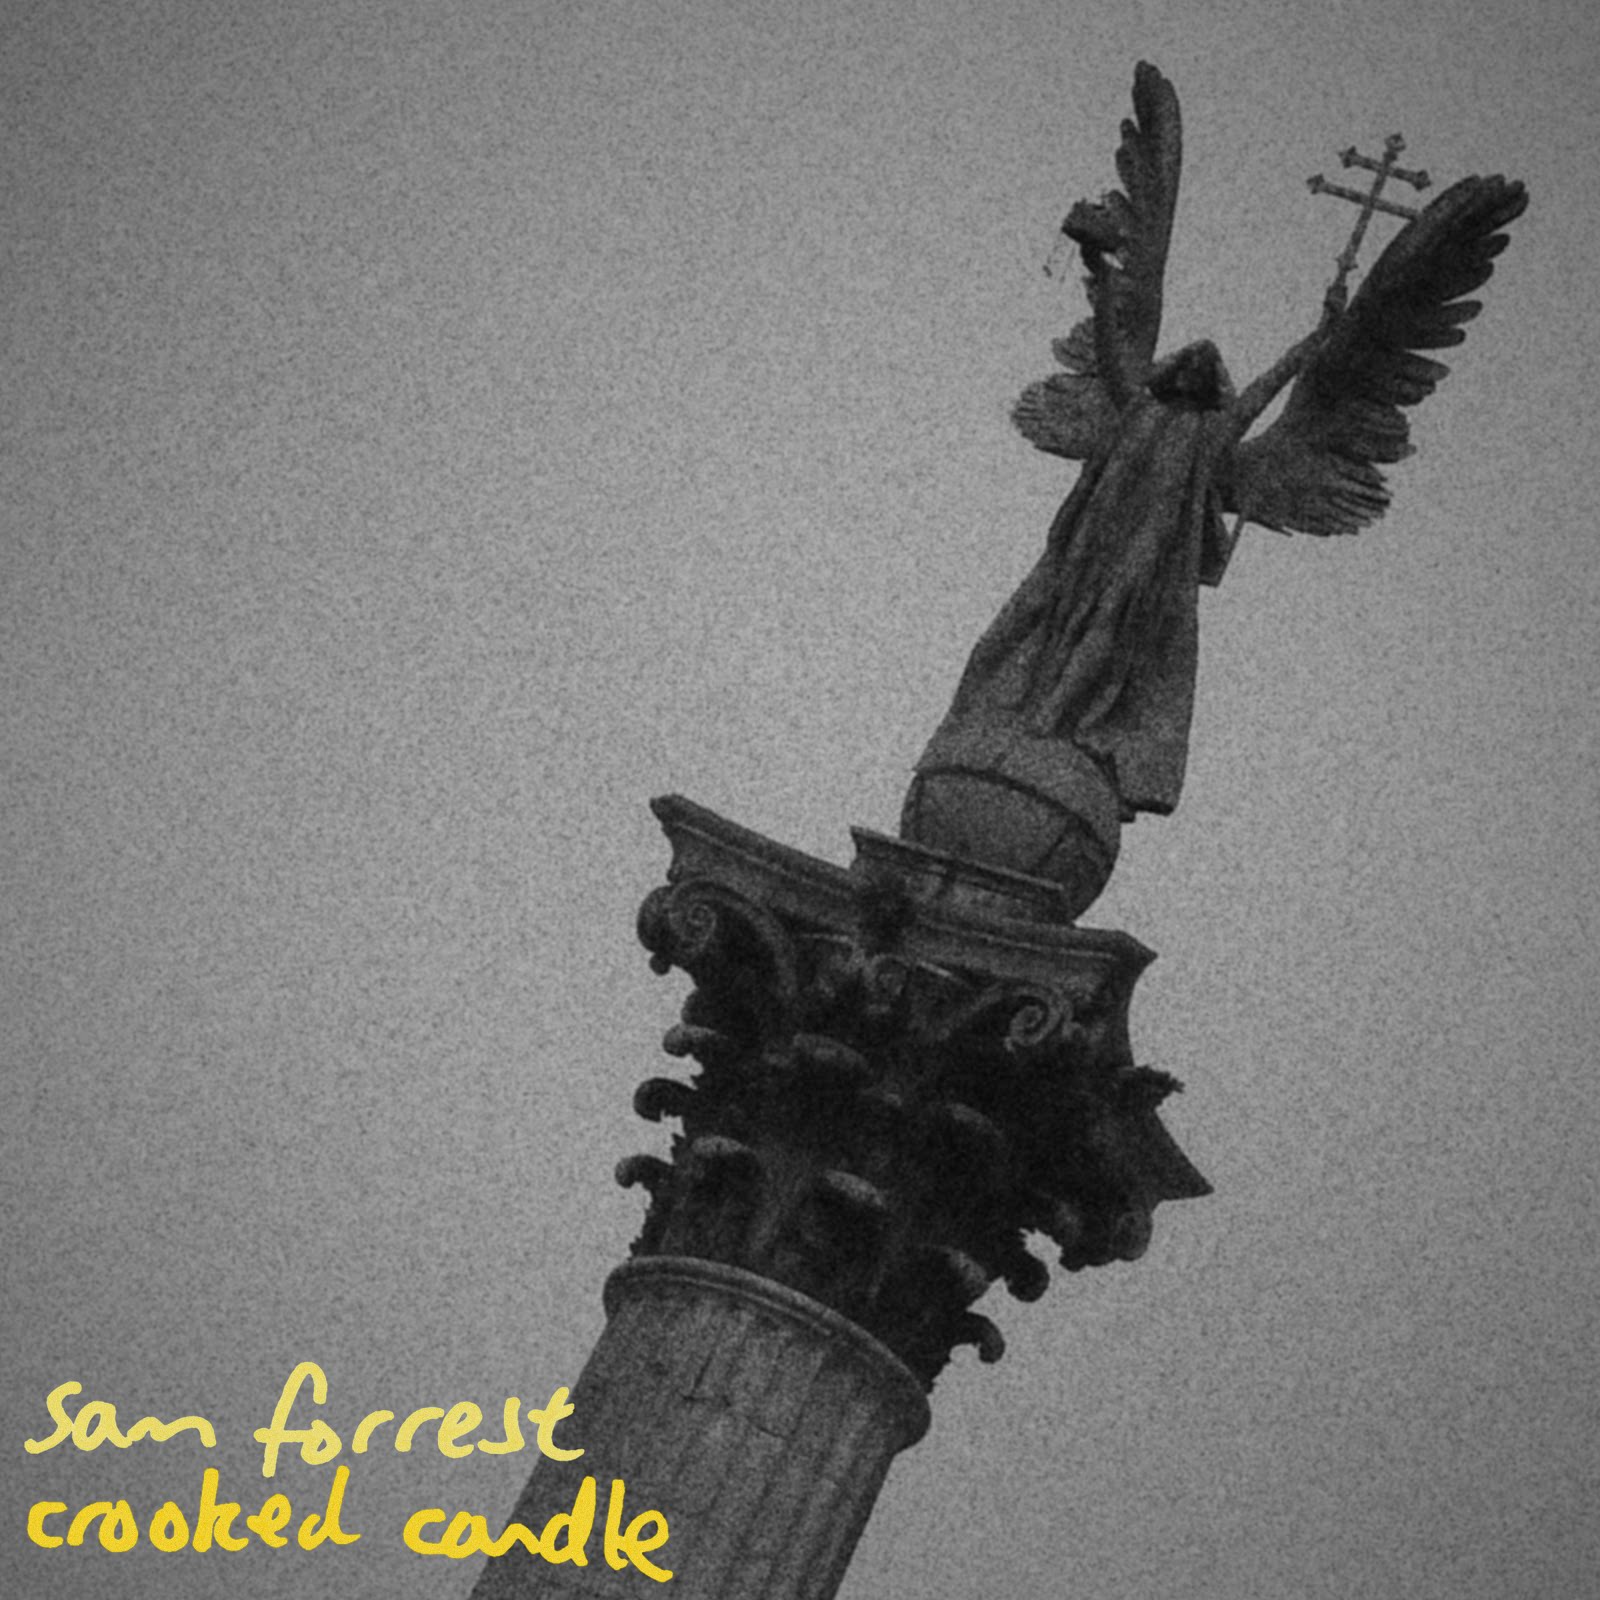 crooked candle